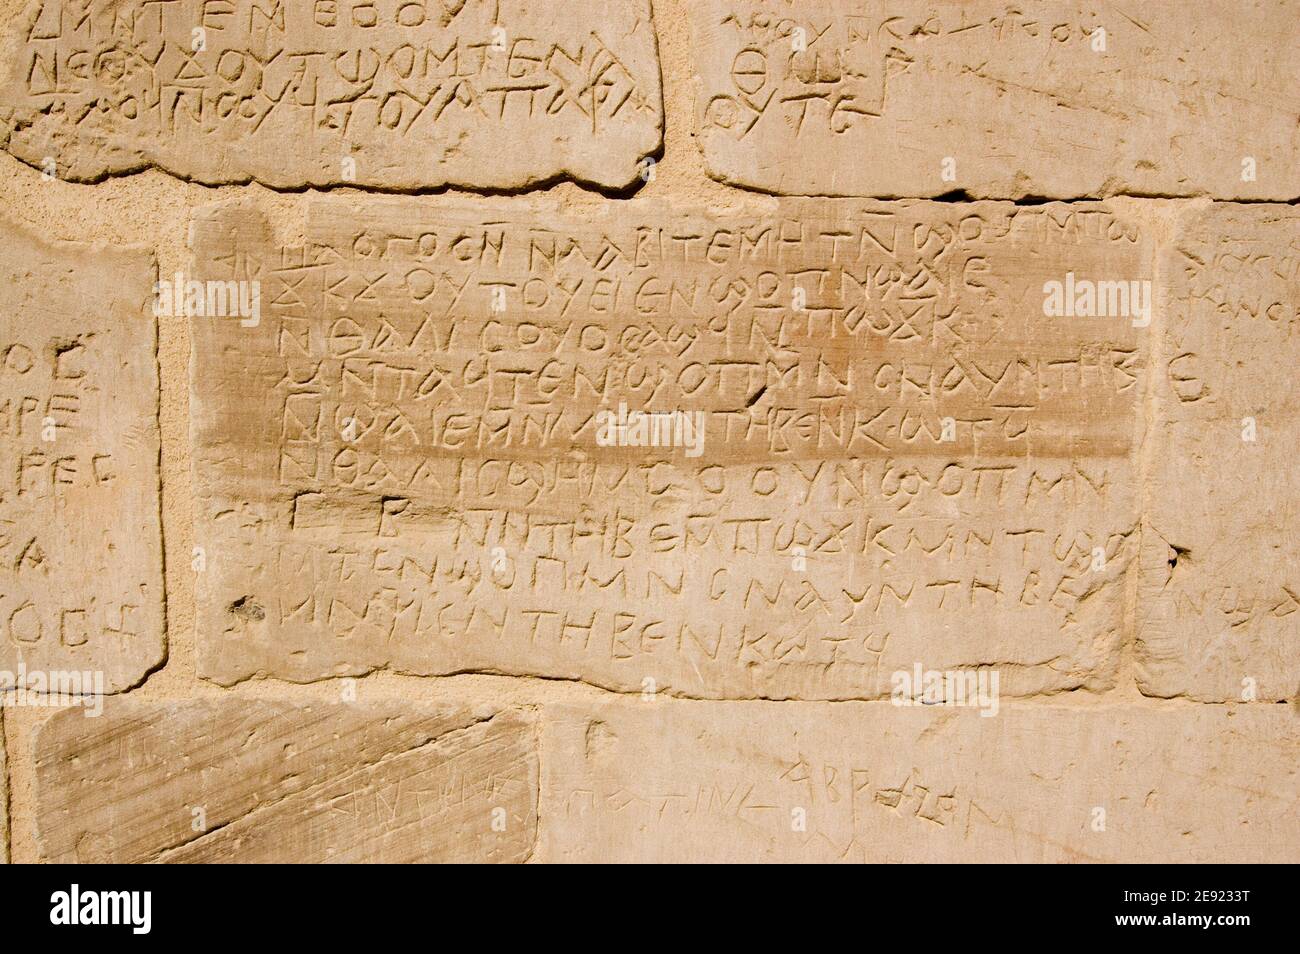 Ancient Greek writing carved into the wall of an Ancient Egyptian temple at Deir el Medina, Luxor, Egypt. Stock Photo